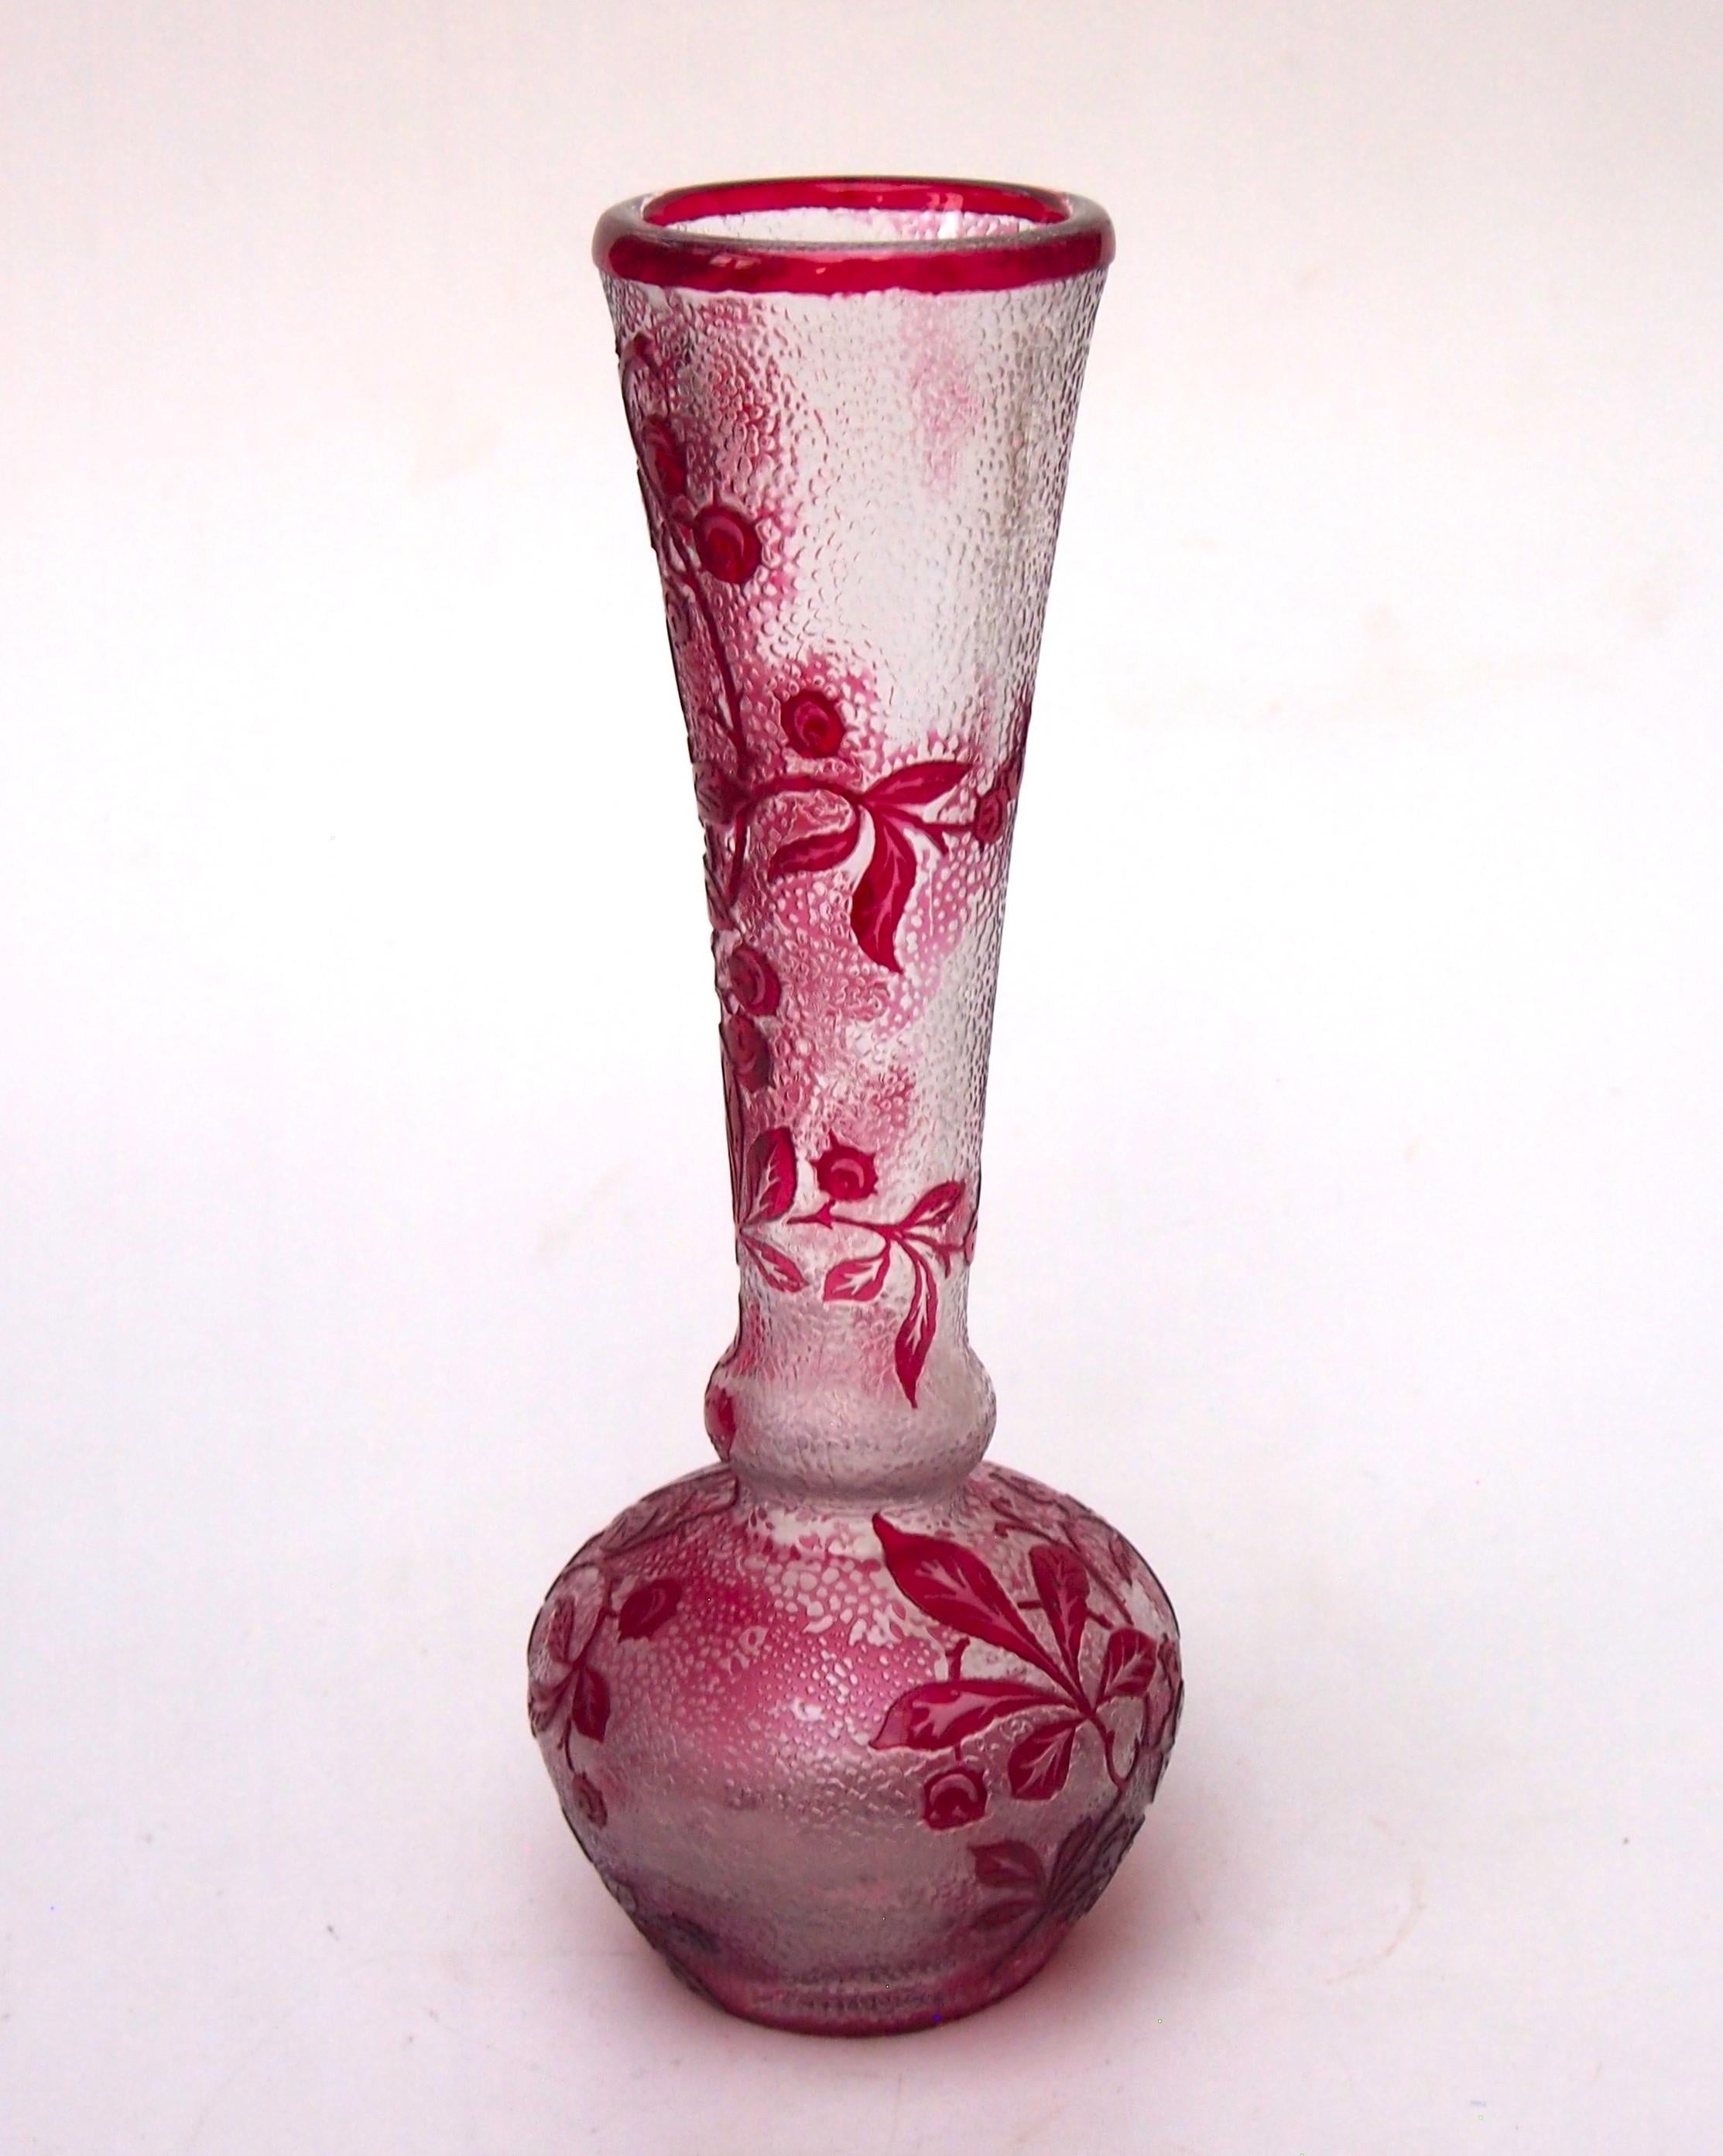 Classic Baccarat cameo crystal vase c 8 inches tall vase depicting slightly stylised horse chestnut branches with spikey chestnuts in deep red over clear - with a stylised background pattern in the clear area. Made  c 1900. It has a near double